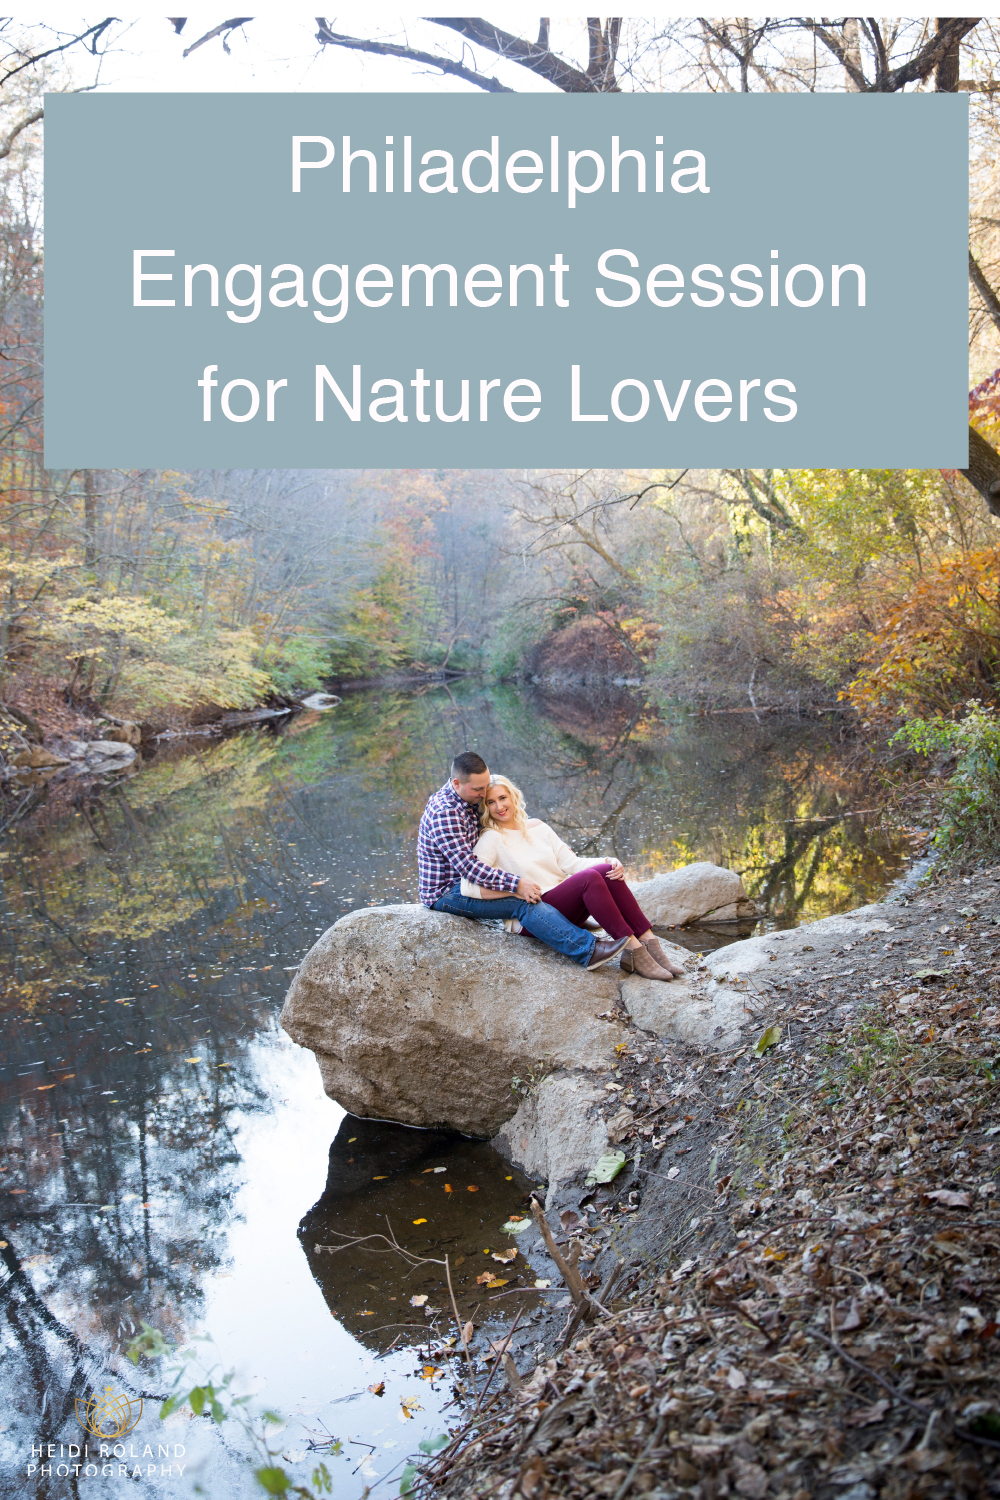 Philadelphia Engagement session for nature lovers by Heidi Roland Photography